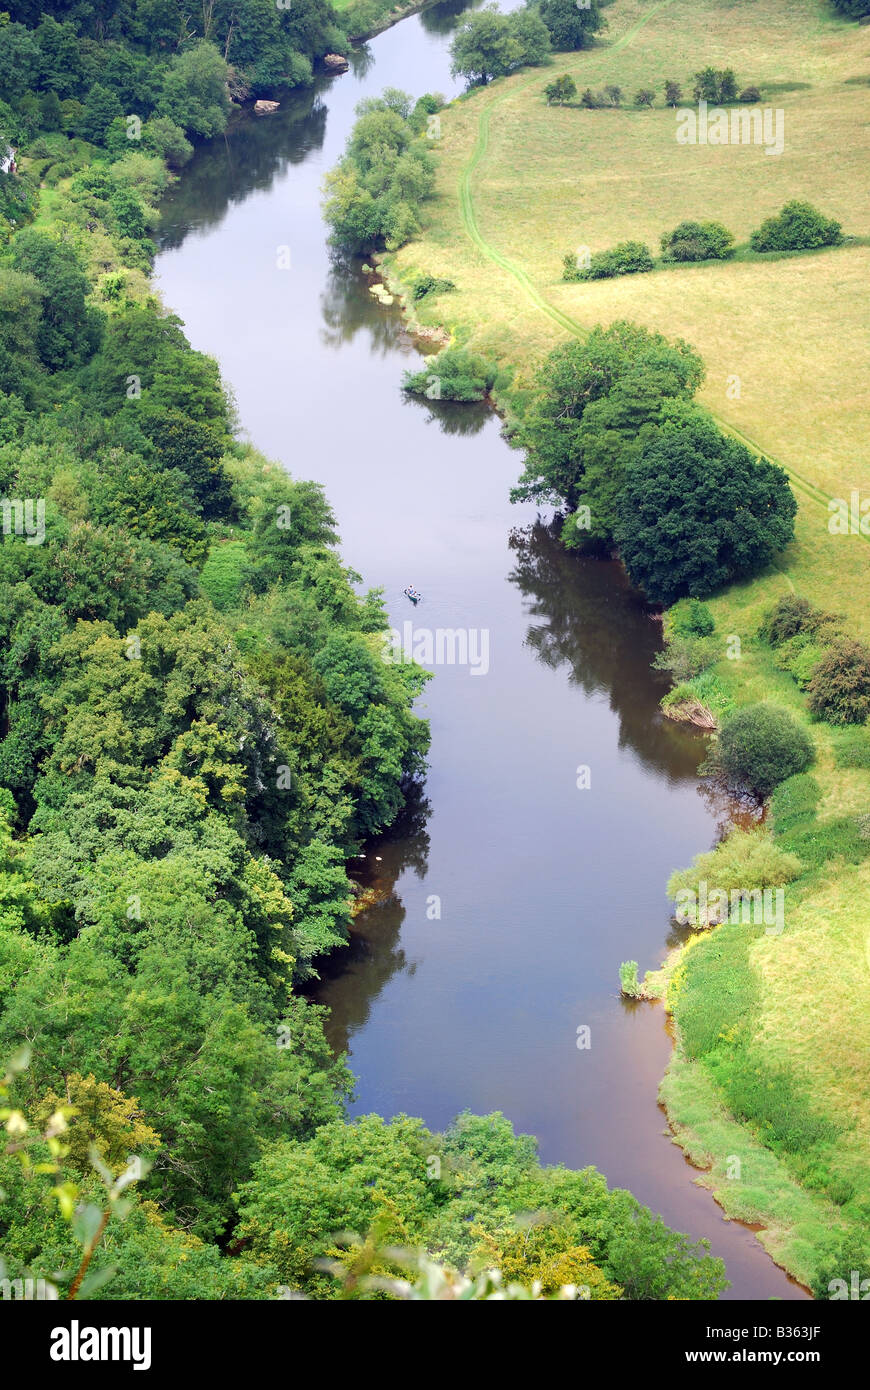 View of River Wye from Symonds Yat Rock Lookout, Gloucestershire, England, United Kingdom Stock Photo